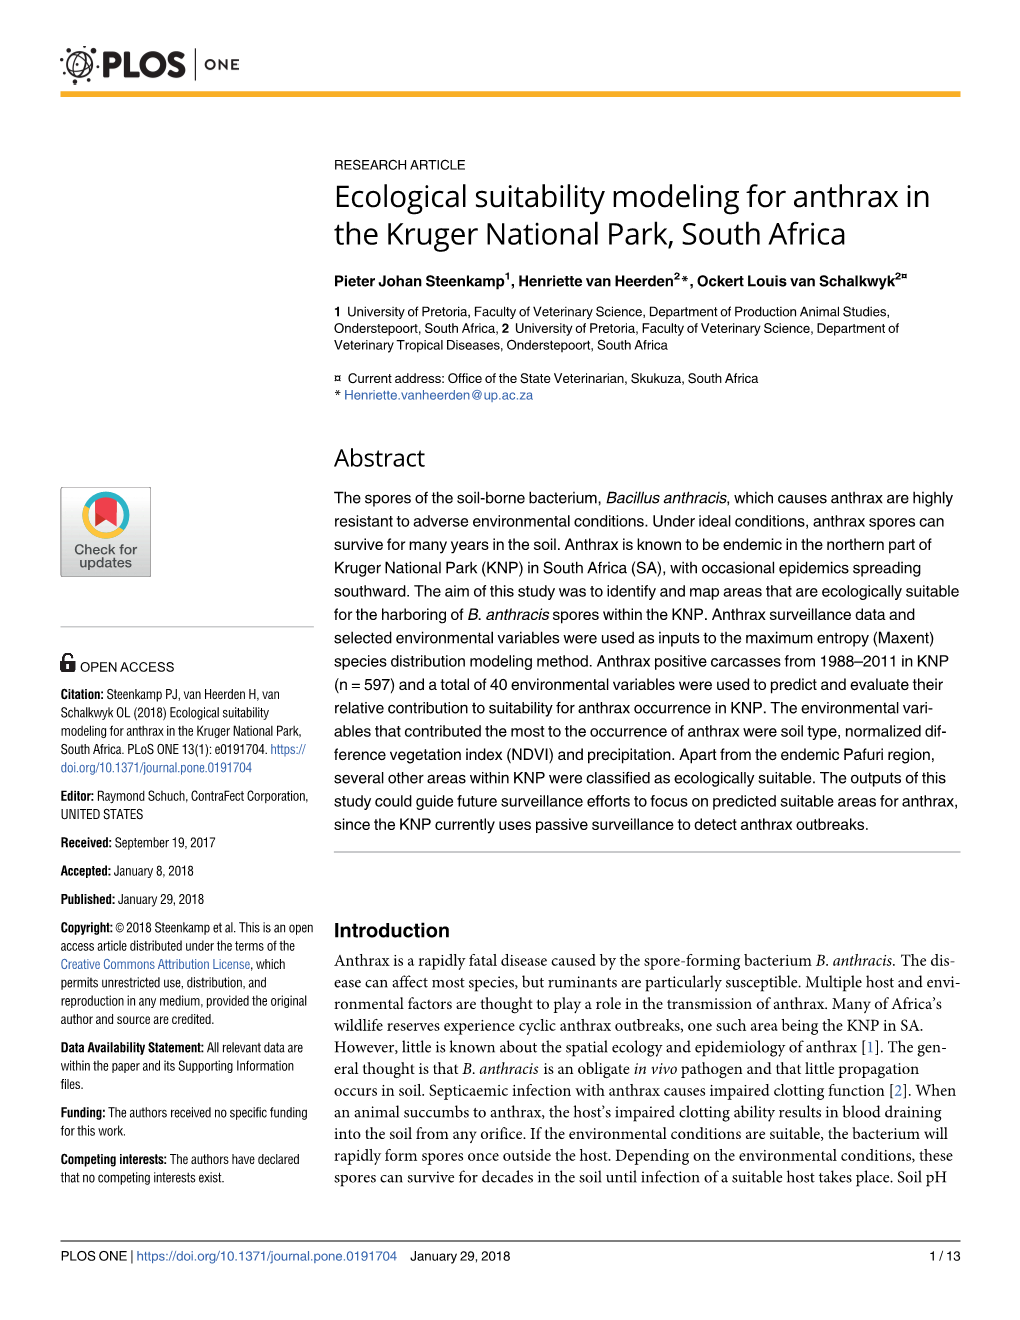 Ecological Suitability Modeling for Anthrax in the Kruger National Park, South Africa